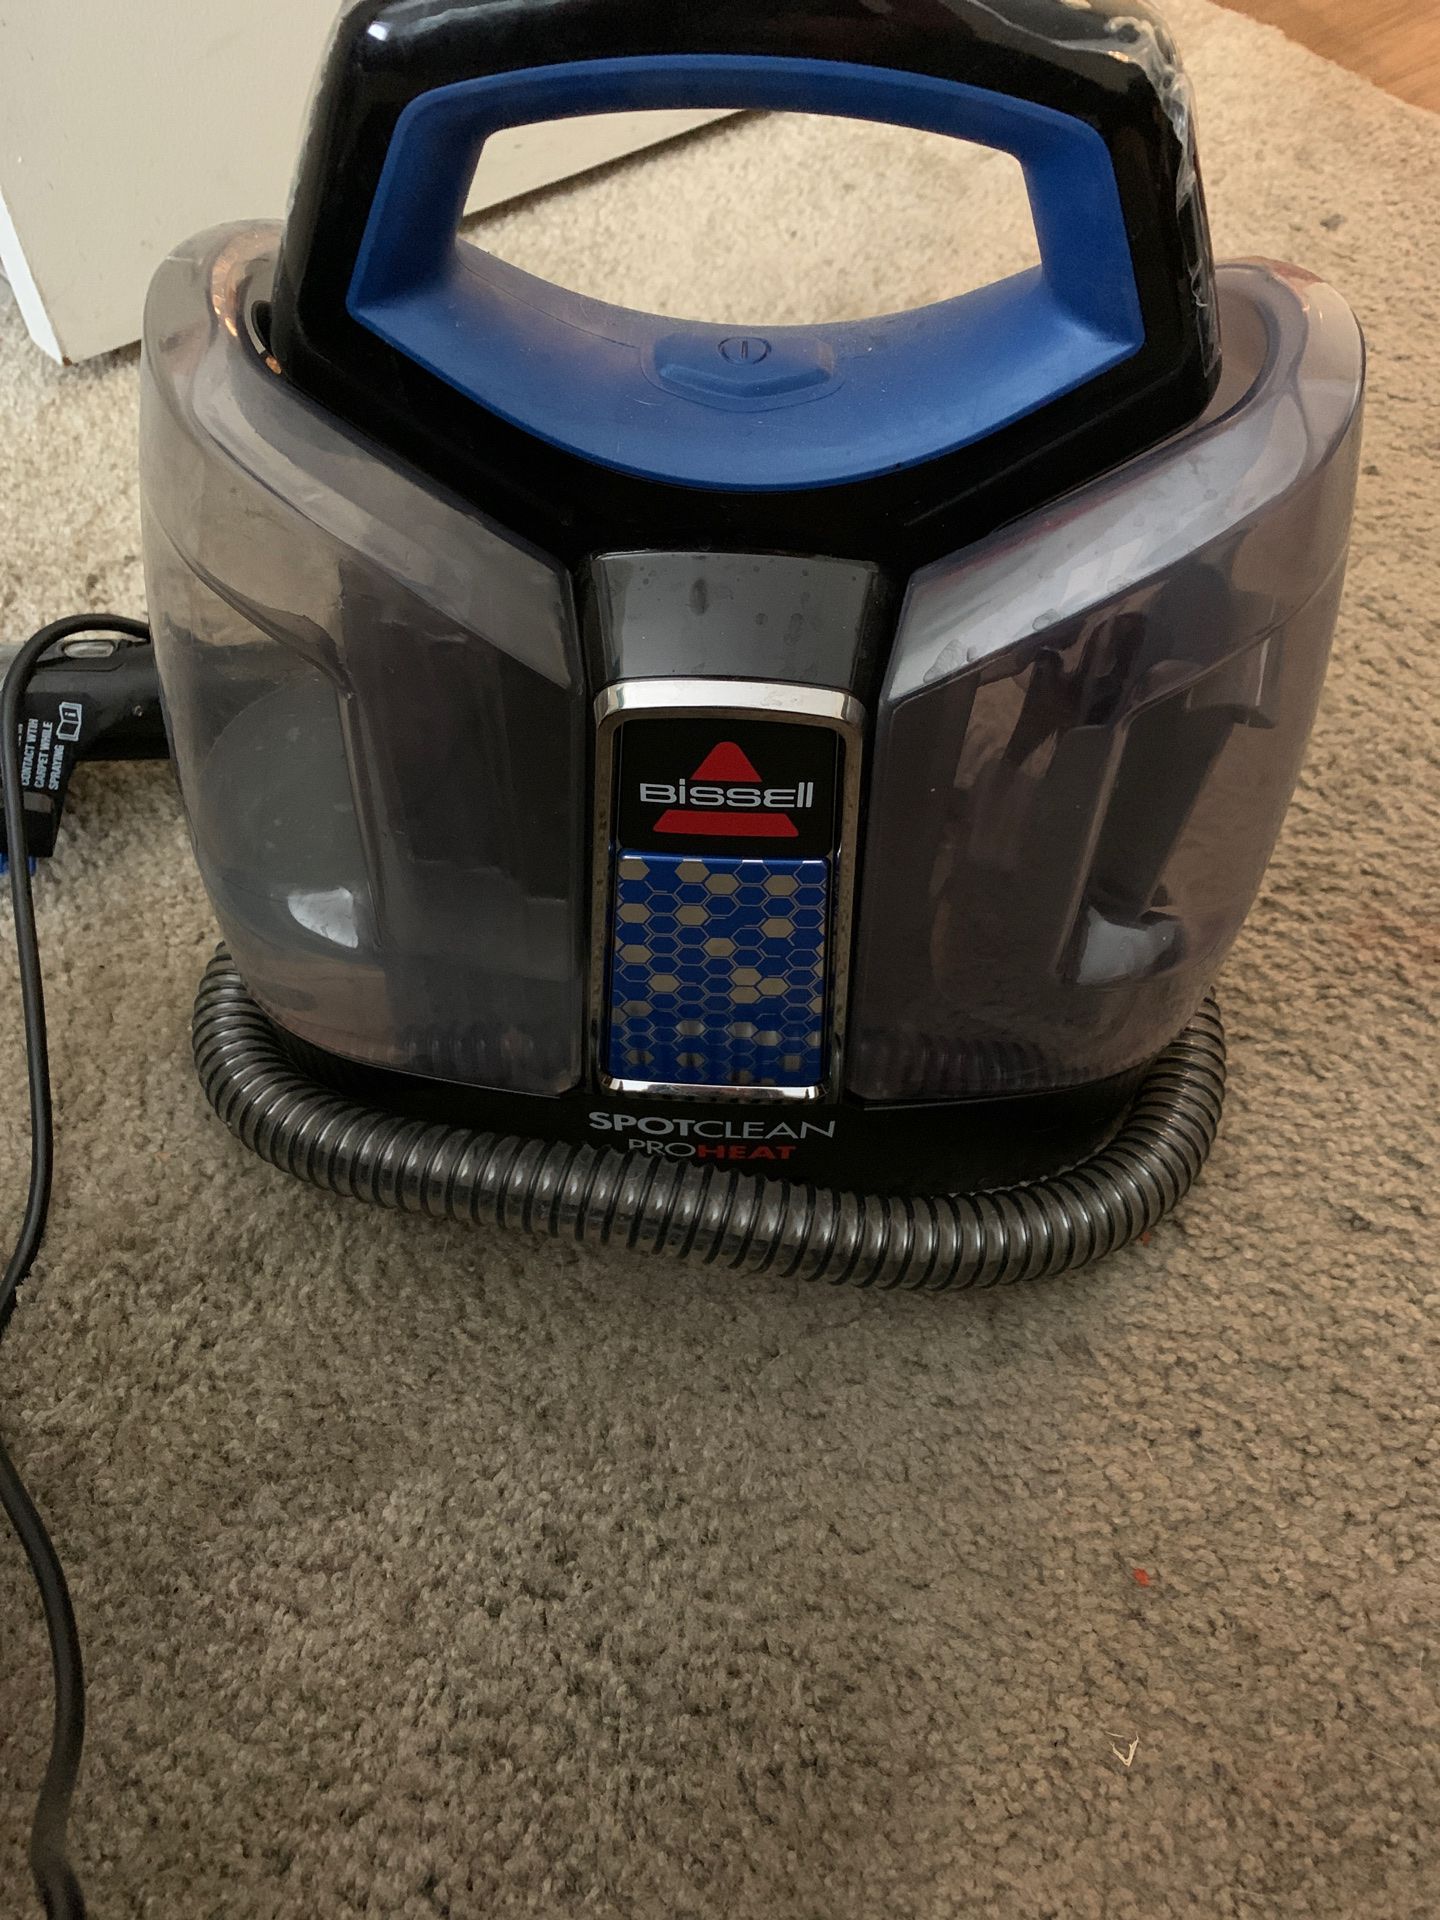 Bissell Spotclean Proheat Carpet Cleaner